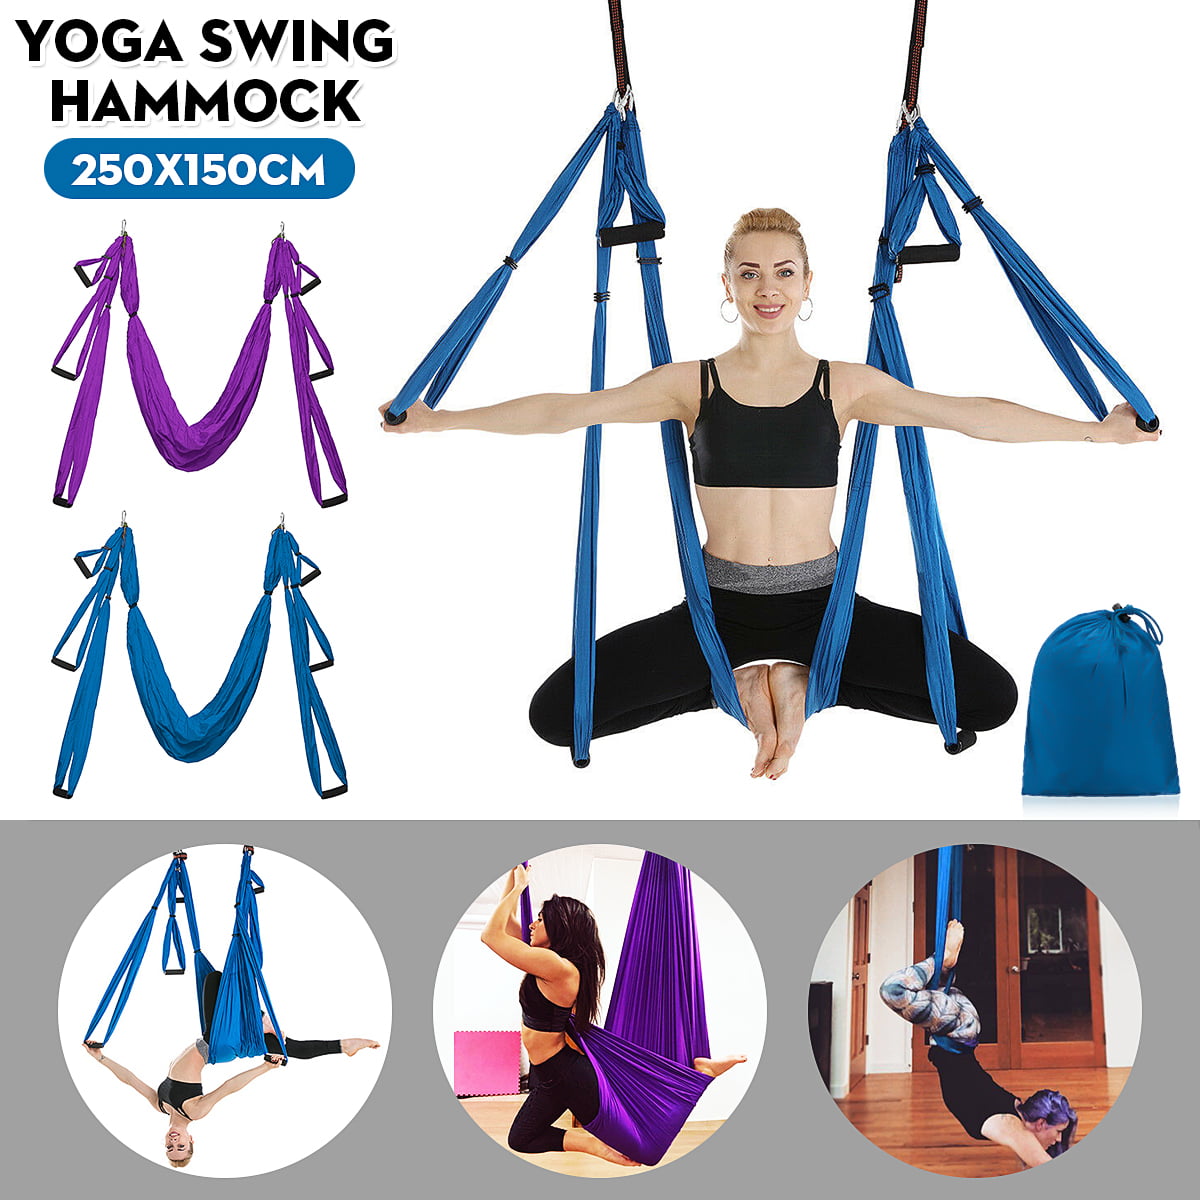 Details about   Aerial Yoga Hammock Swing Invertion Pilates Sling Anti-Gravity Home Fitness Gym 